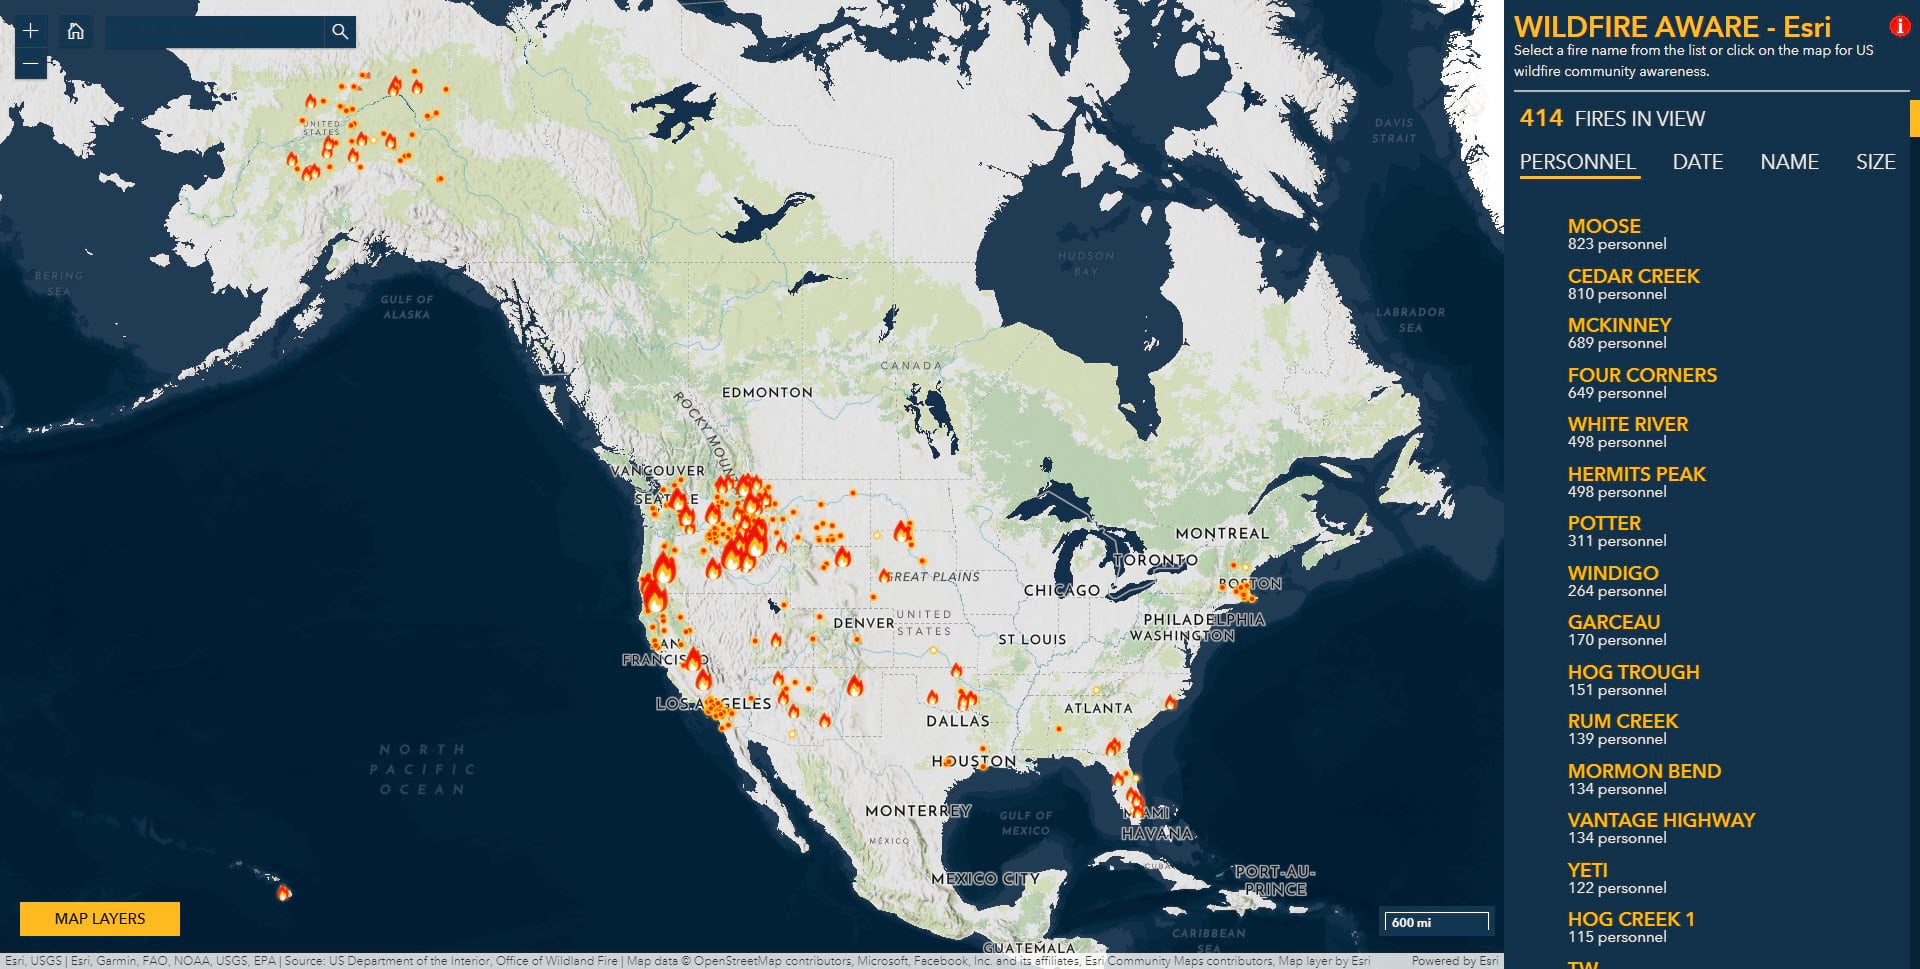 Graphic of Wildfire Aware application home page